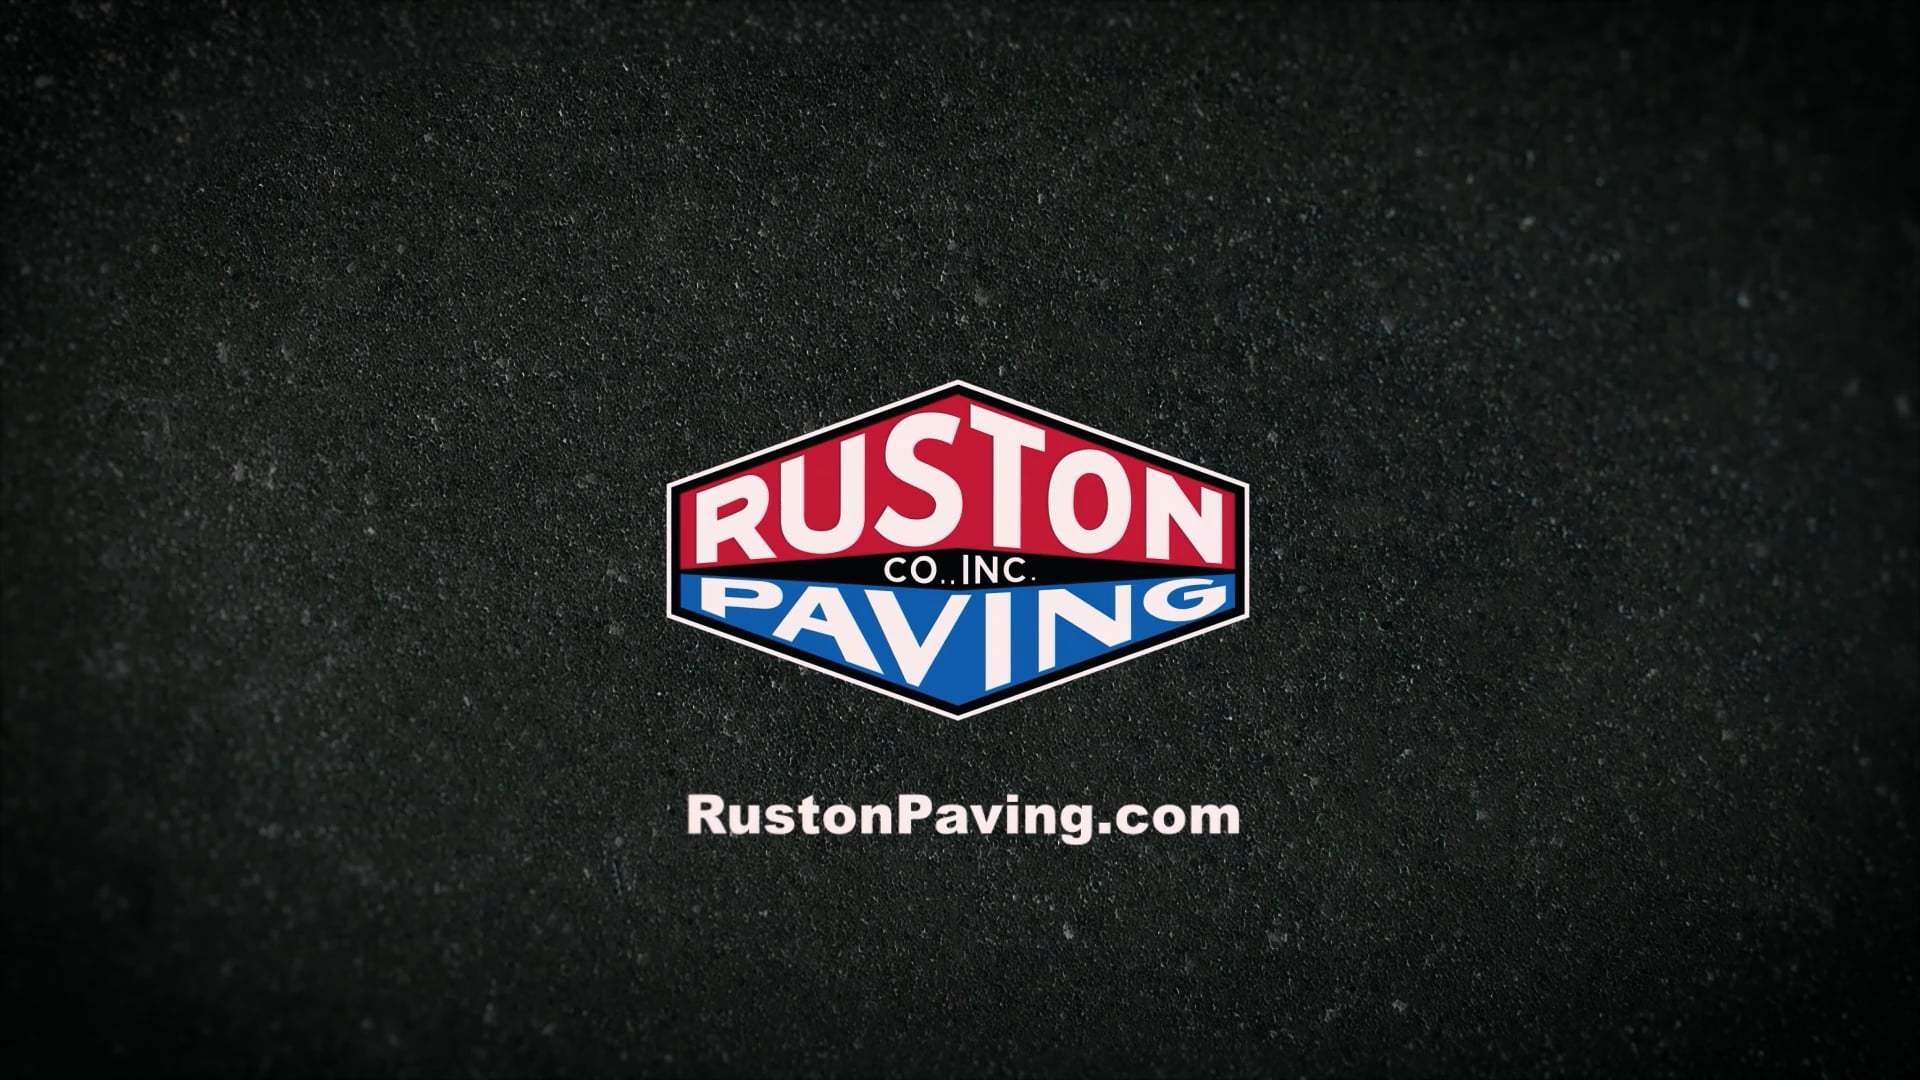 Ruston Paving: Overview